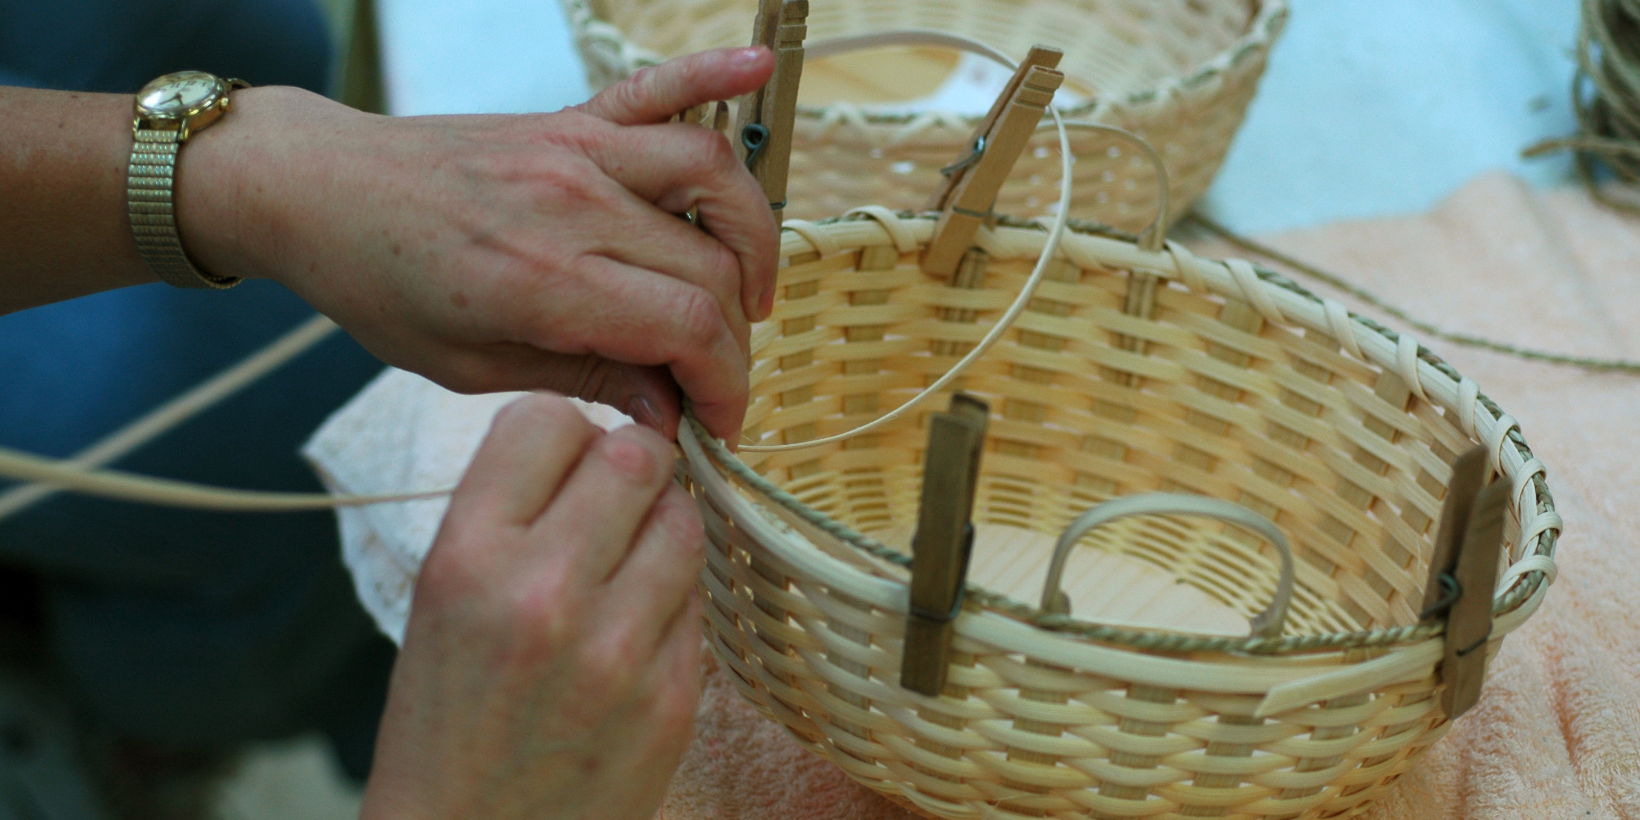 Basket Weaving: Country Clothespin promotional image